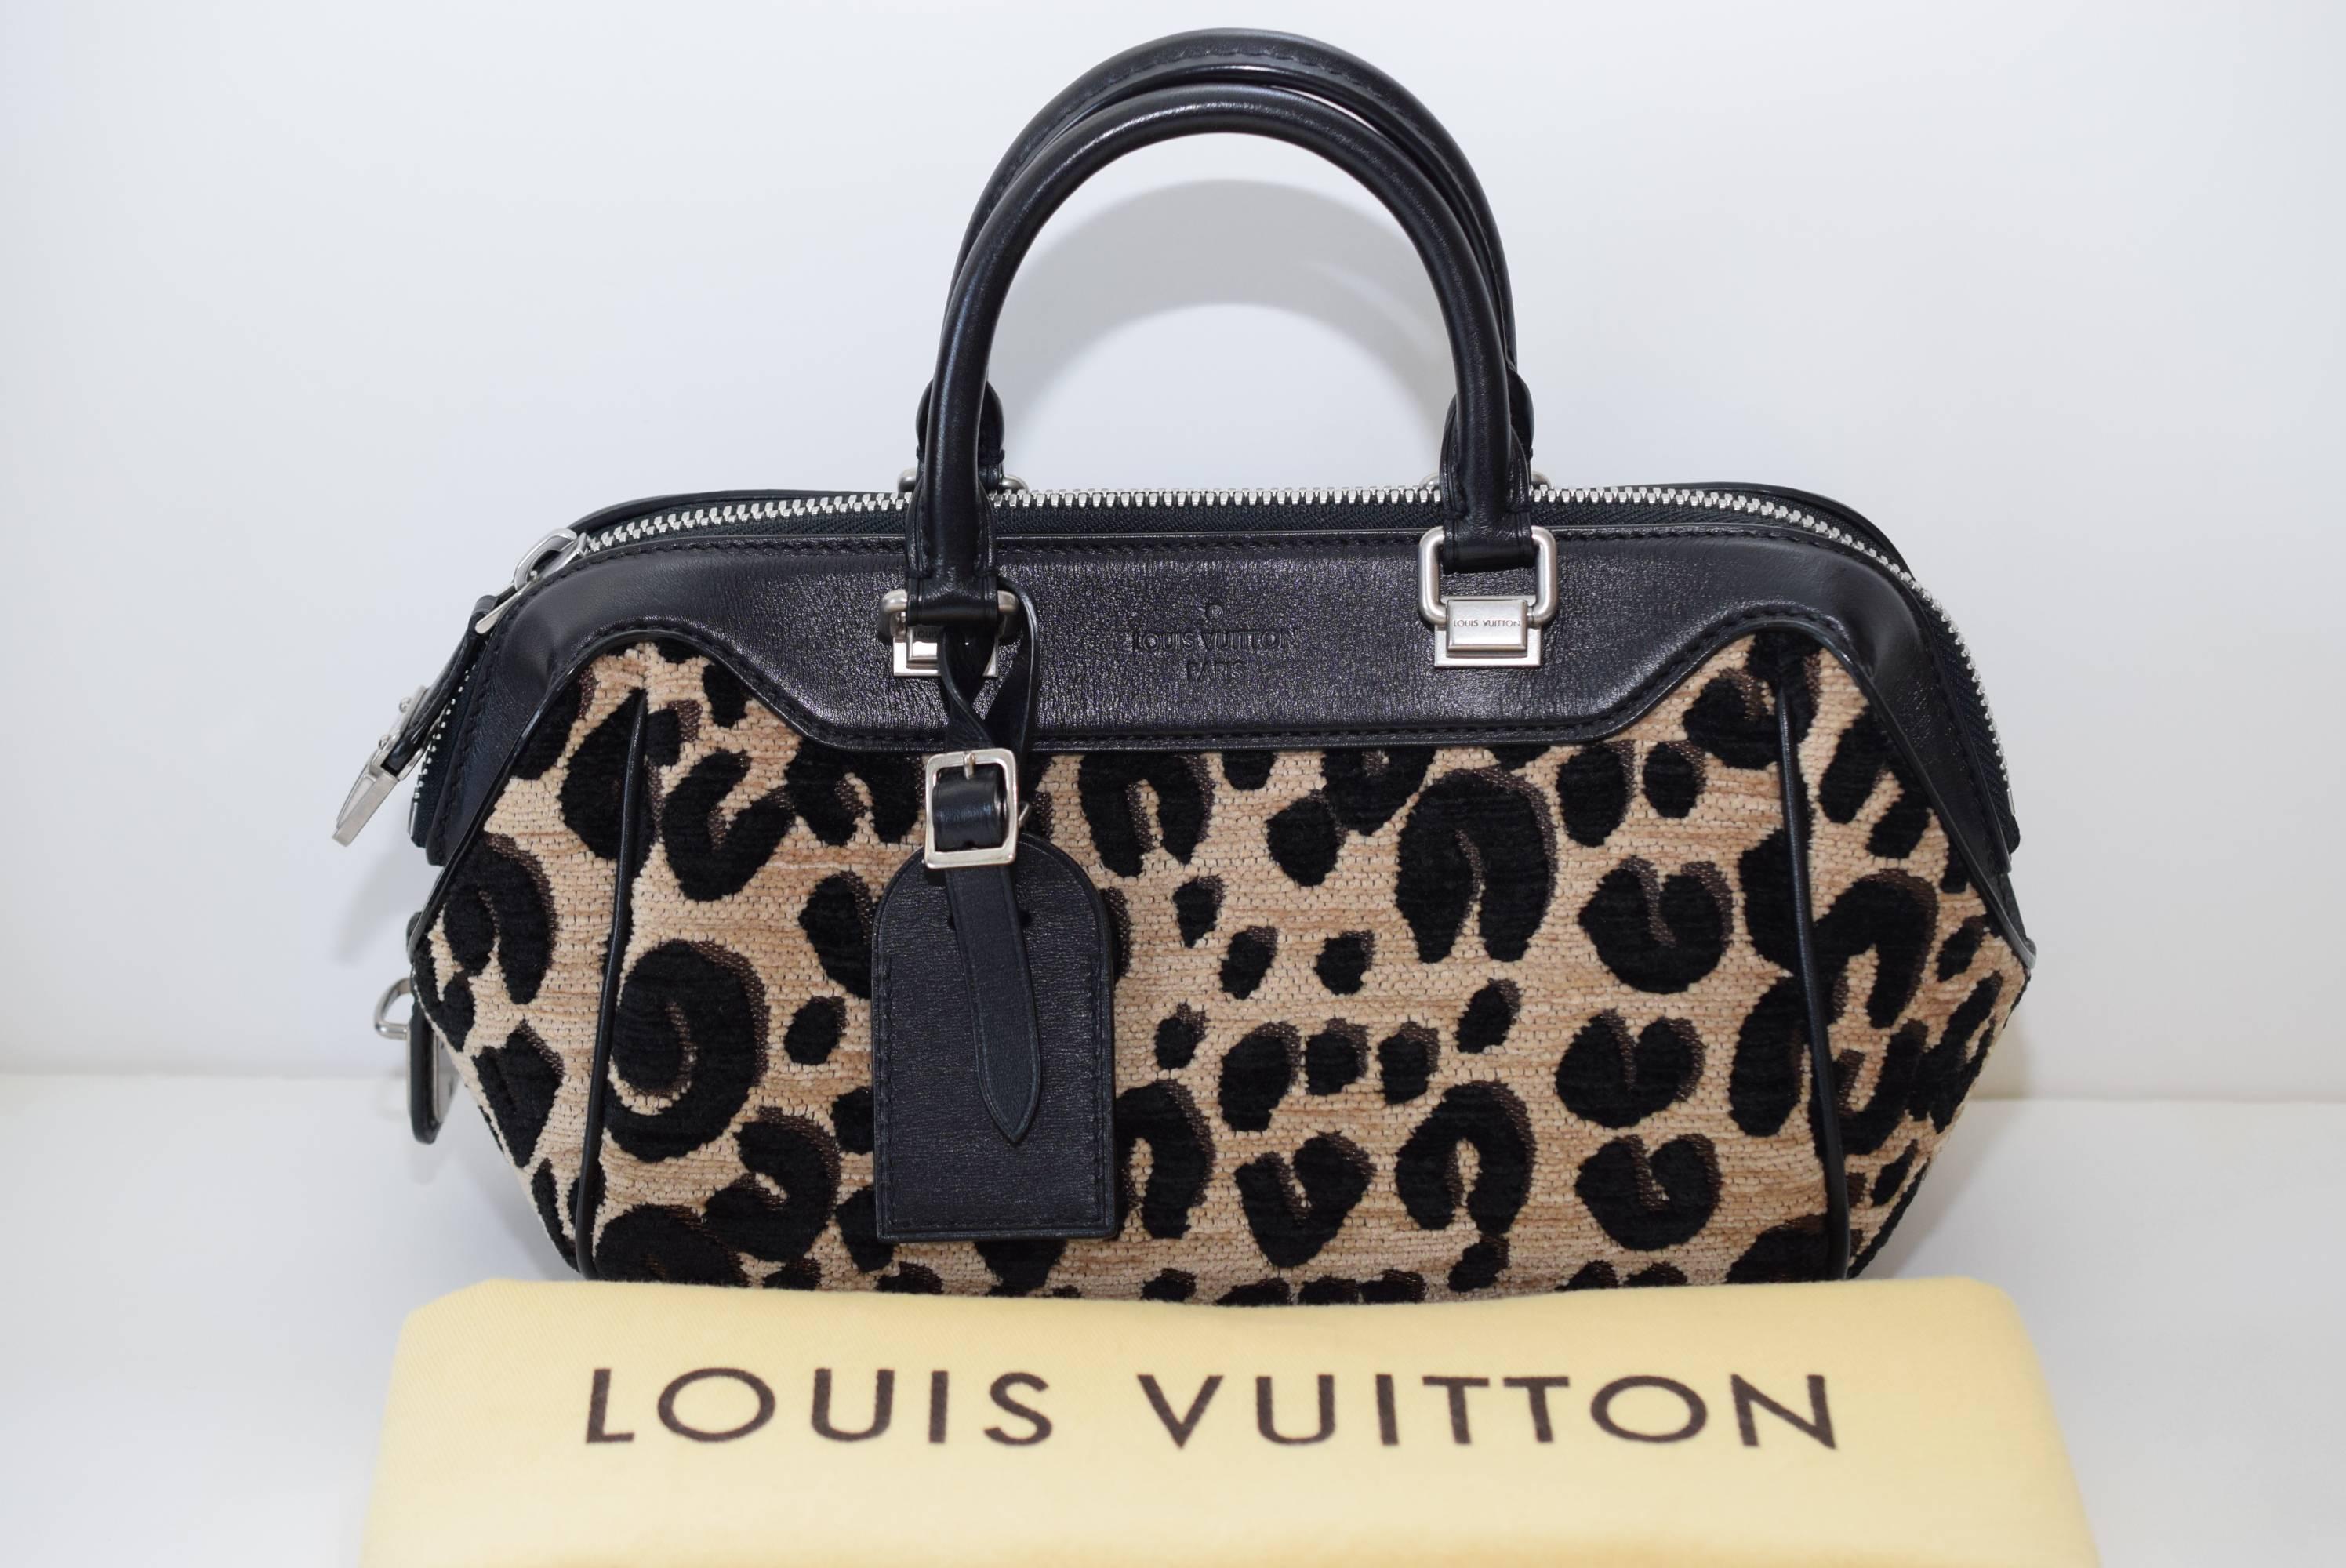 Limited Edition Spouse Print Baby Leopard Bag. Features silver tone hardware, smooth black leather trim and accents with a 4